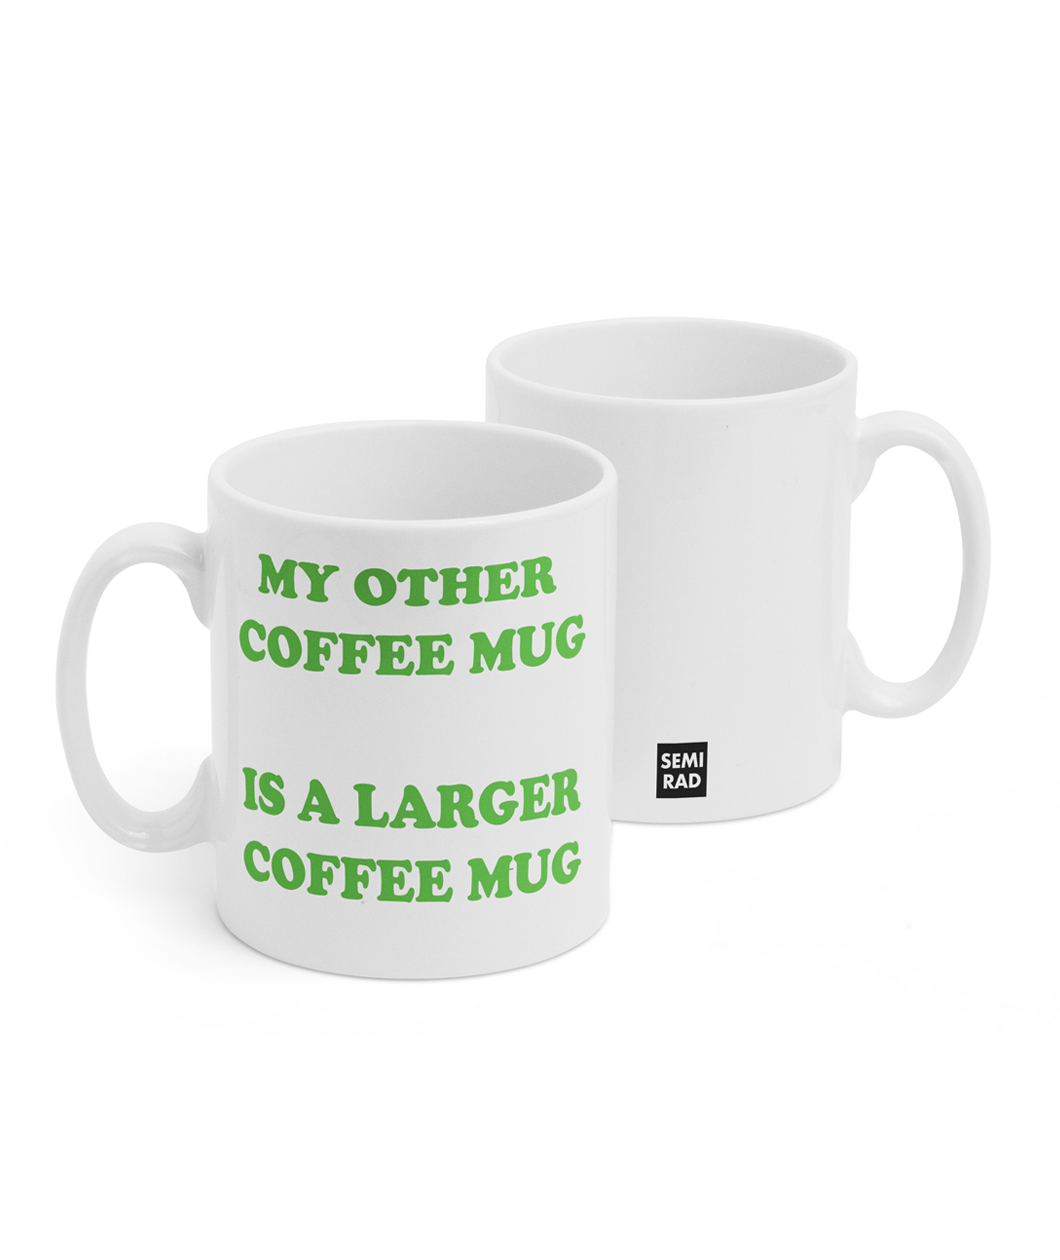 Two white mugs sitting next to each other showing two sides of the same mug. The front side has text that reads 